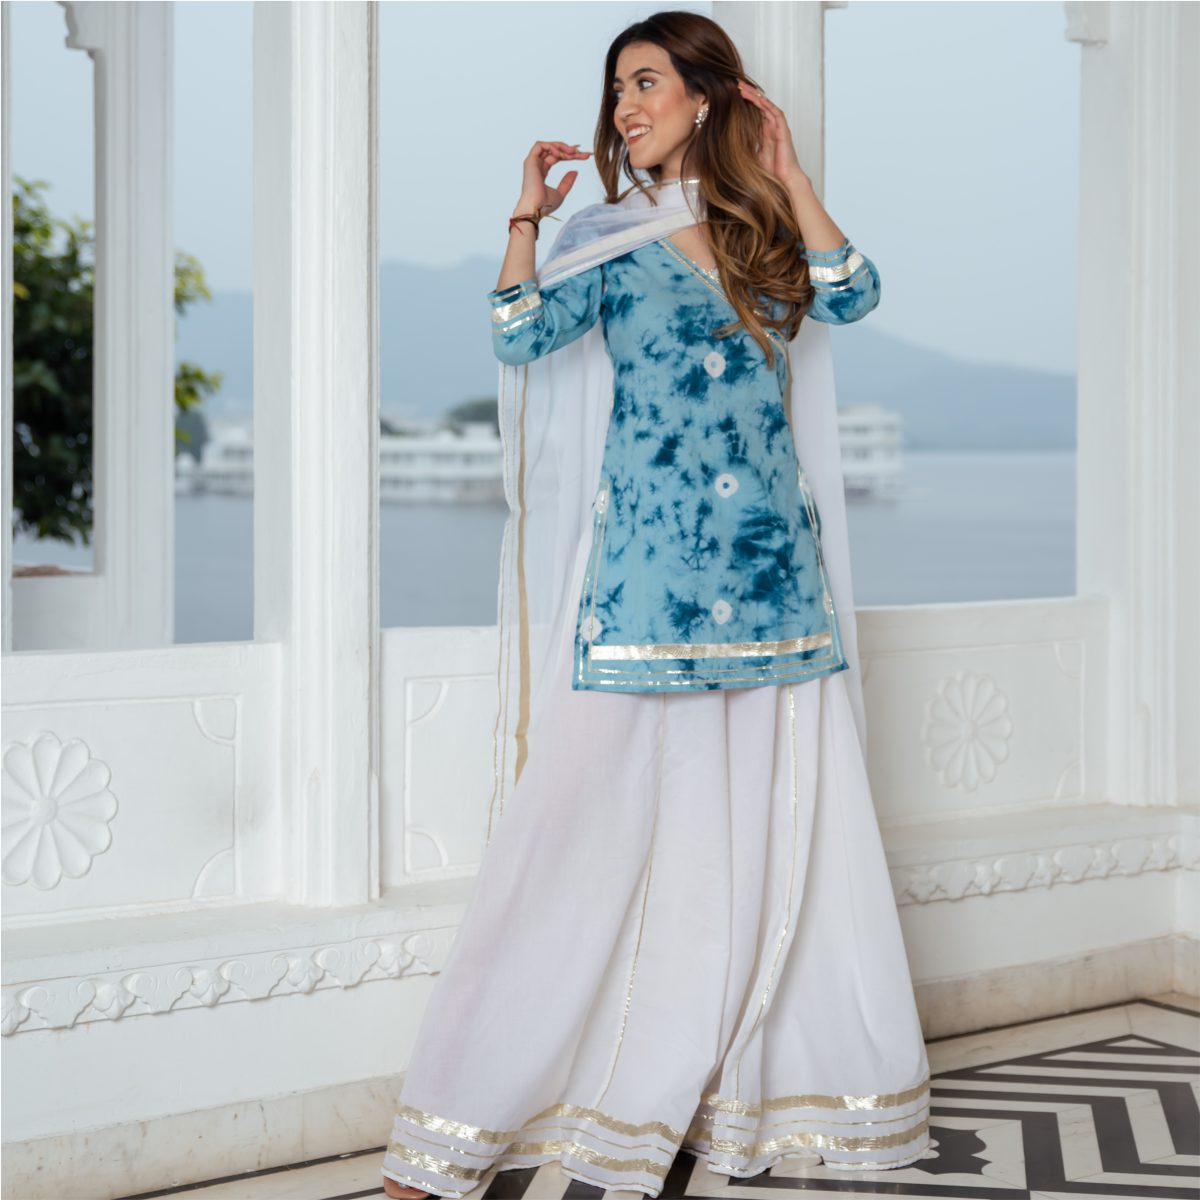 KRHYSIV - A bandhani-style salwar suit is perfect for channeling cultural  sentiments. Presenting this pleasant palazzo suit with bandhej style prints  on it. Grab this at INR 7,580 🛒 www.krhysiv.com . . #